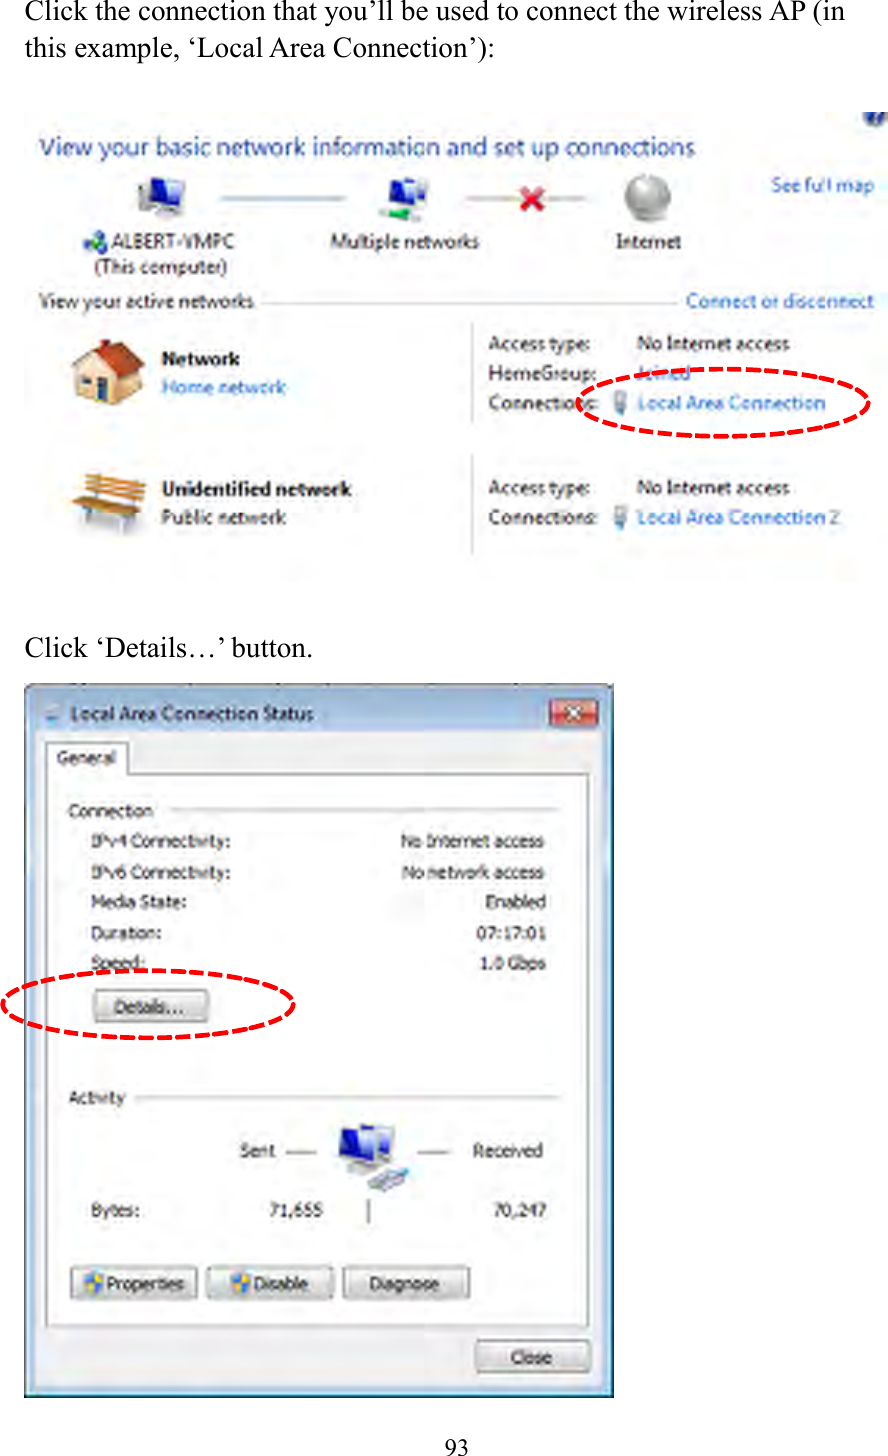  93  Click the connection that you’ll be used to connect the wireless AP (in this example, ‘Local Area Connection’):    Click ‘Details…’ button.  